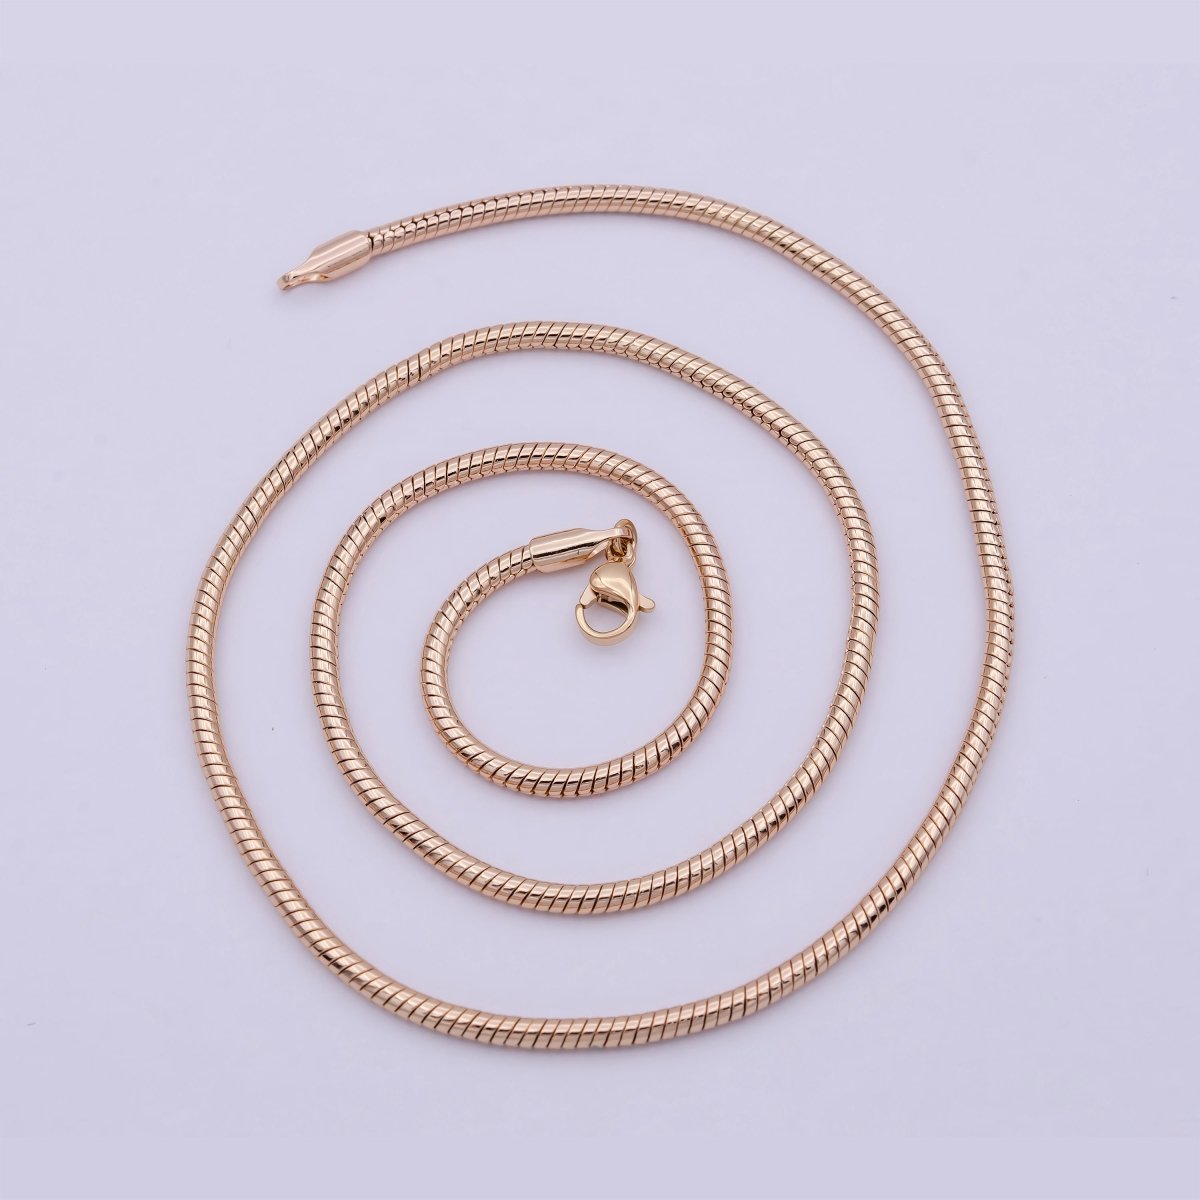 Rose Gold Round Snake Chain Omega Chain Necklace, 18K Gold Filled 2.4mm Width Finished Chain, Layering 19.7 Inch Omega Necklace with Lobster Clasps | WA-823 Clearance Pricing - DLUXCA